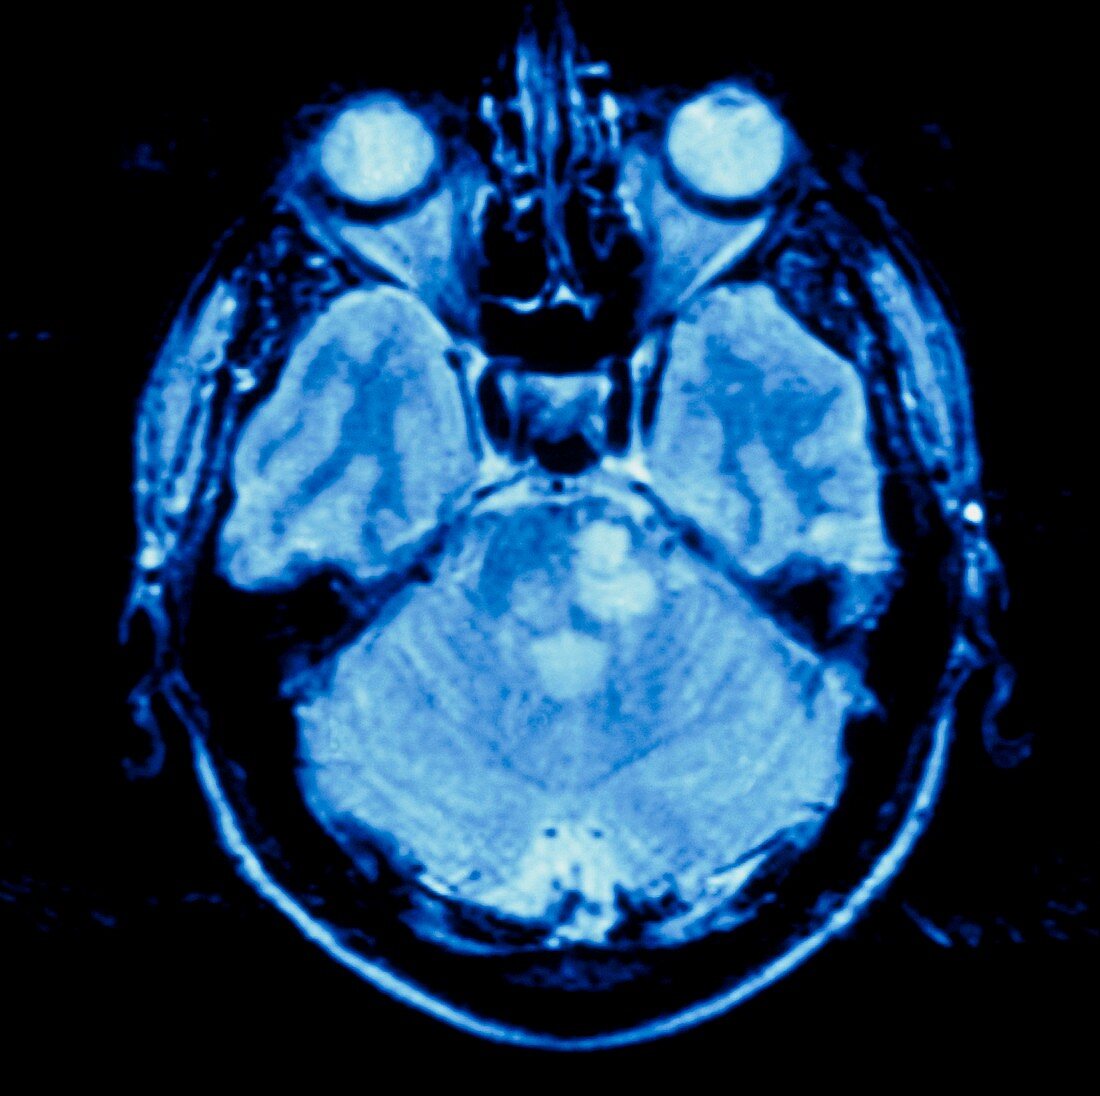 MRI scan of a brain with multiple sclerosis